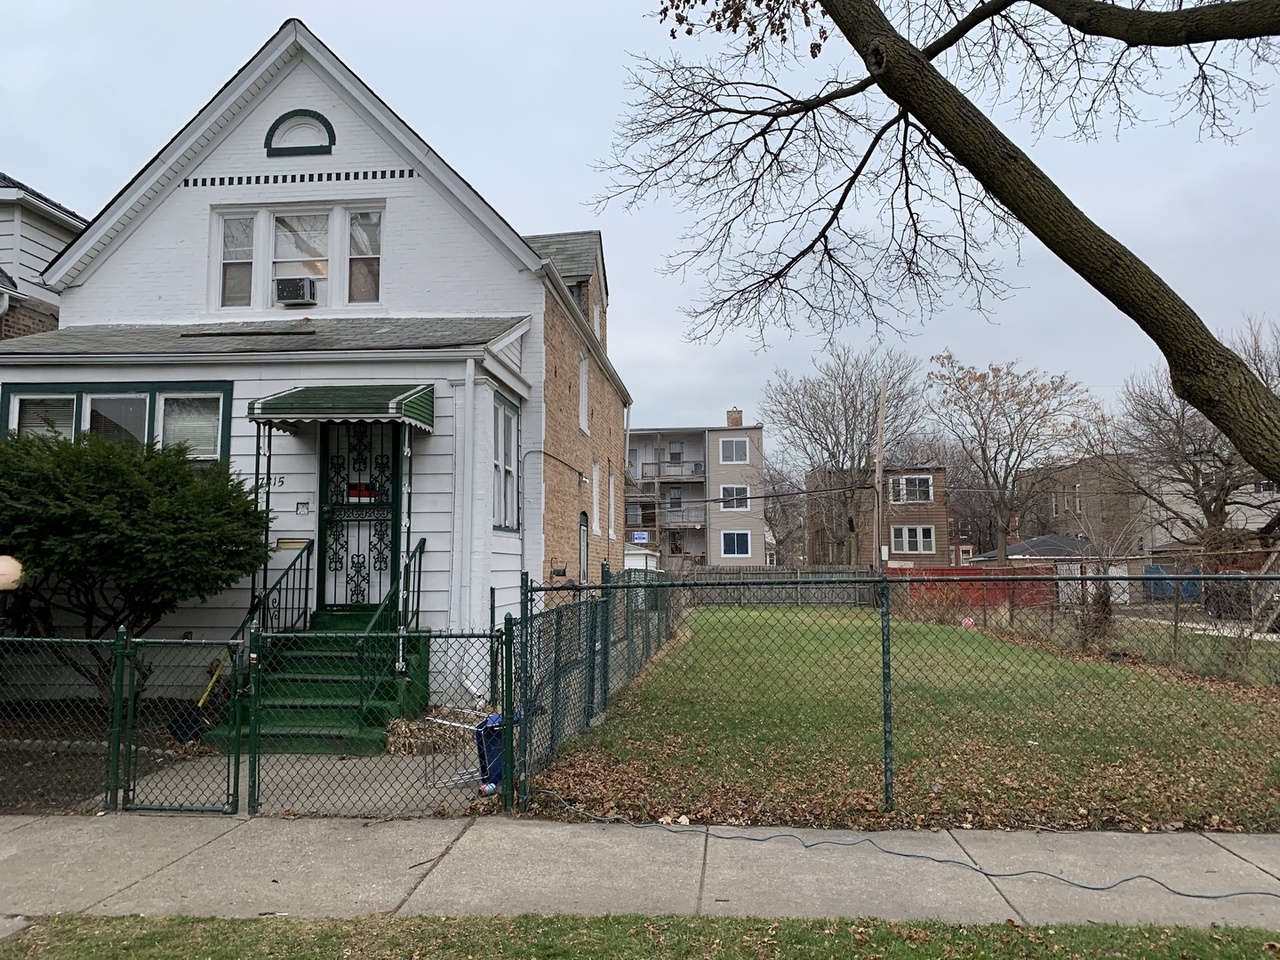 7315 S Kenwood Ave, Chicago, IL 60619 | MLS# 10988818 | Redfin